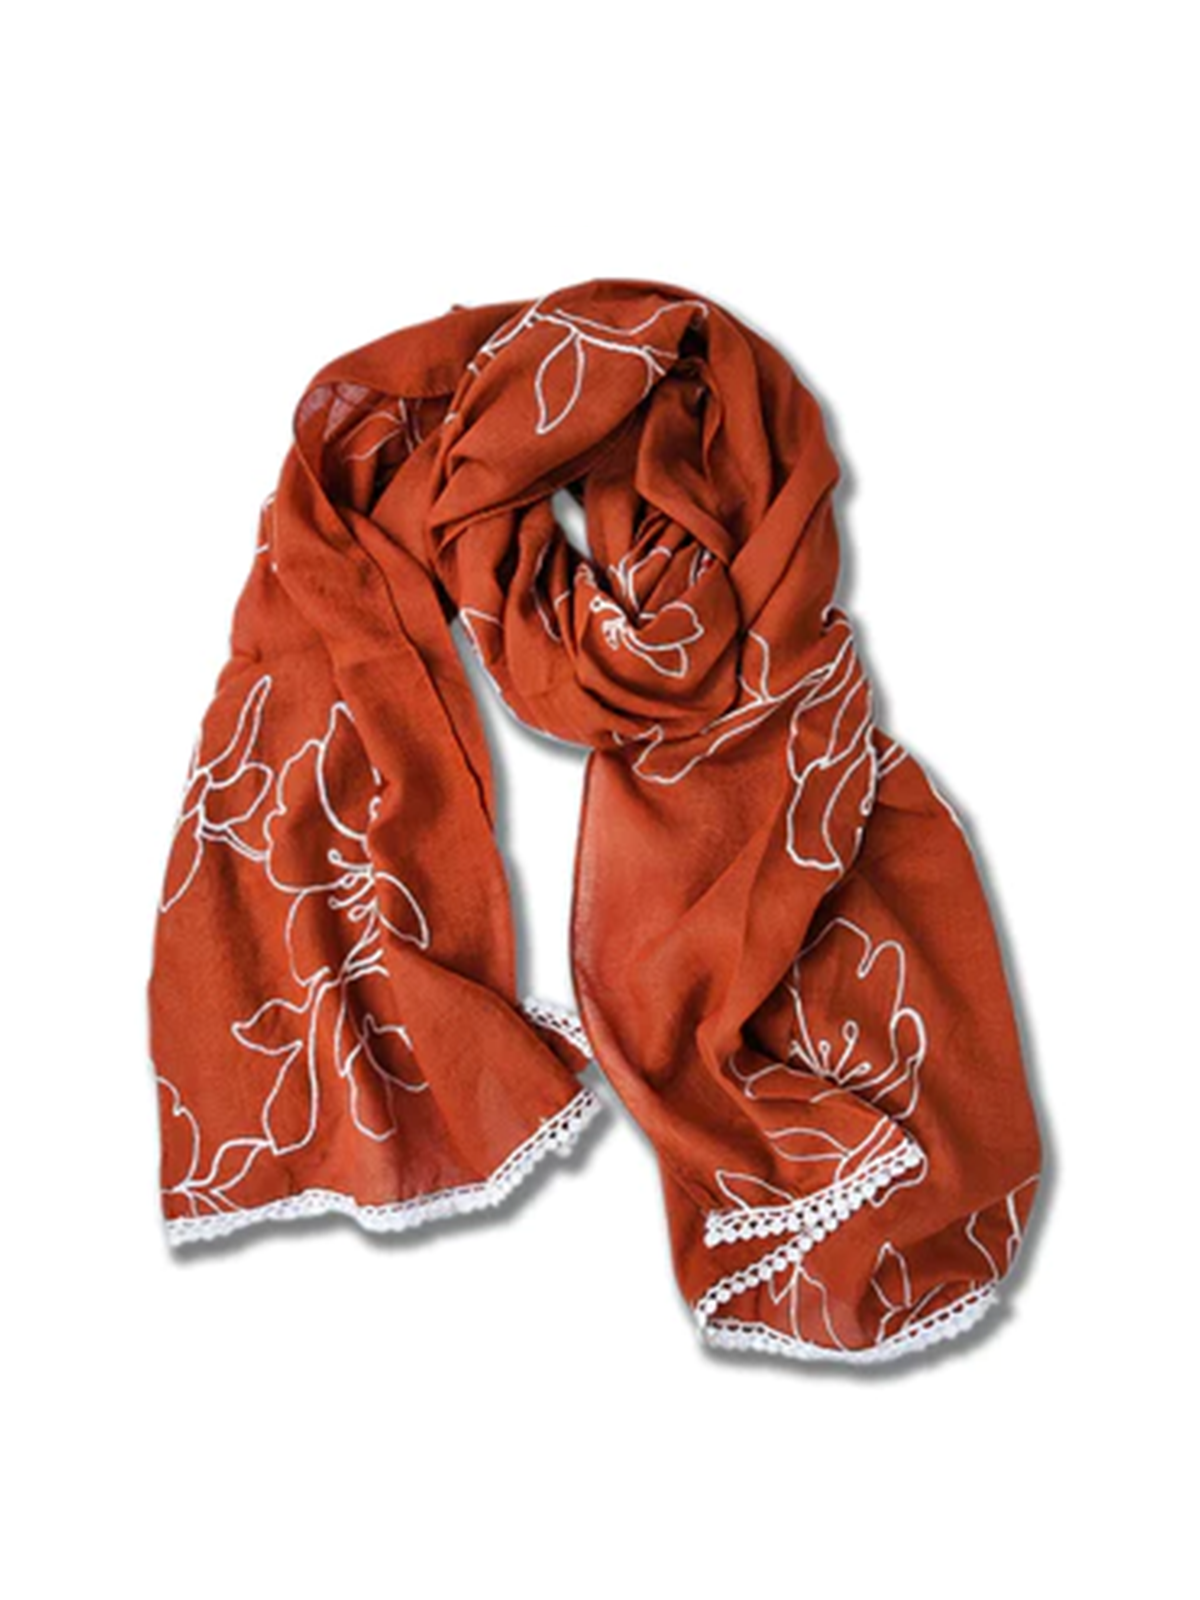 Brick red scarf with white embroidered flower